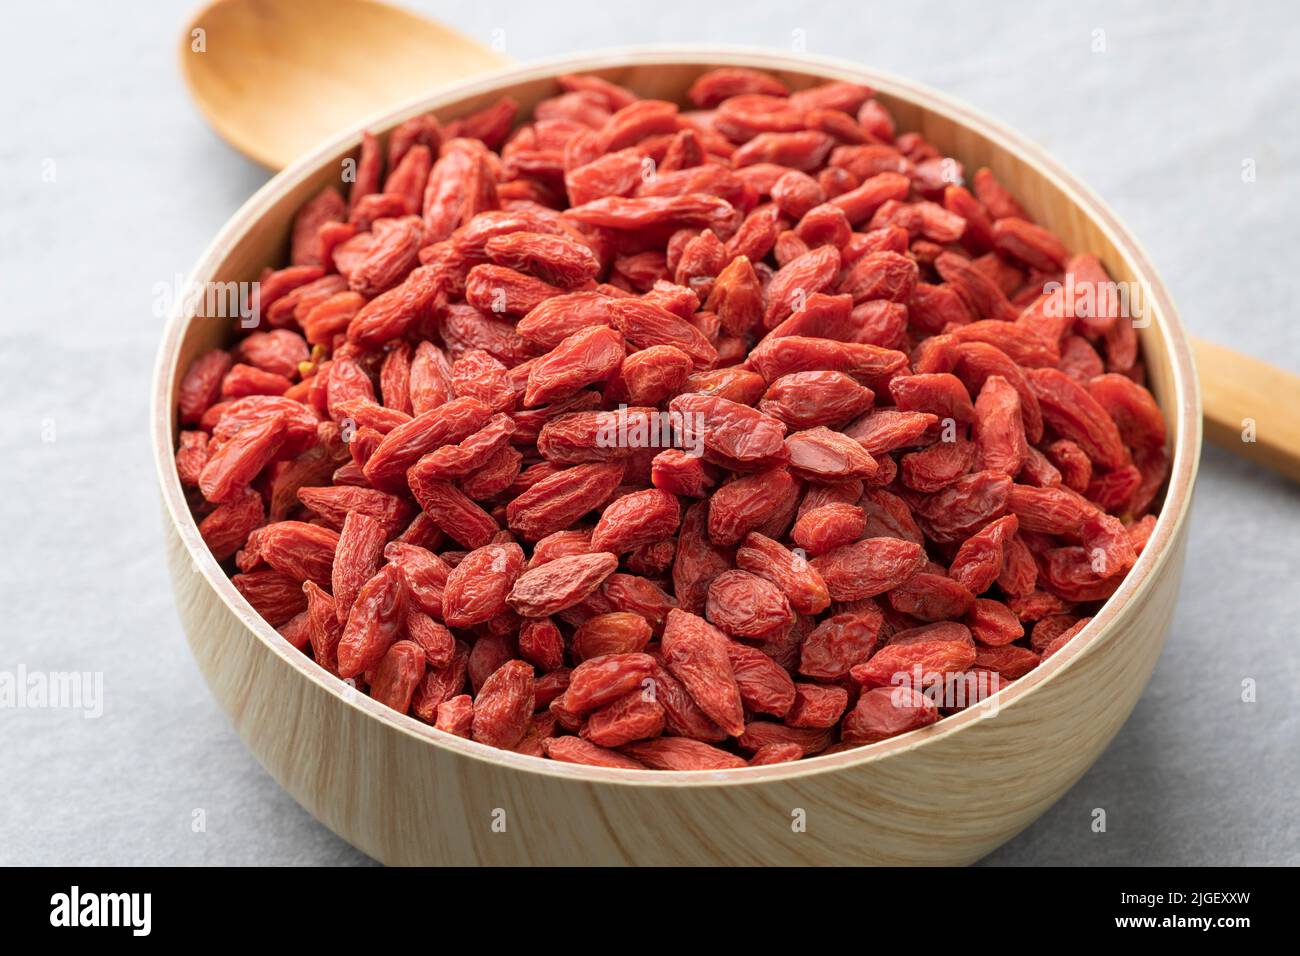 Dried goji berries or wolfberries in a bowl close up Stock Photo